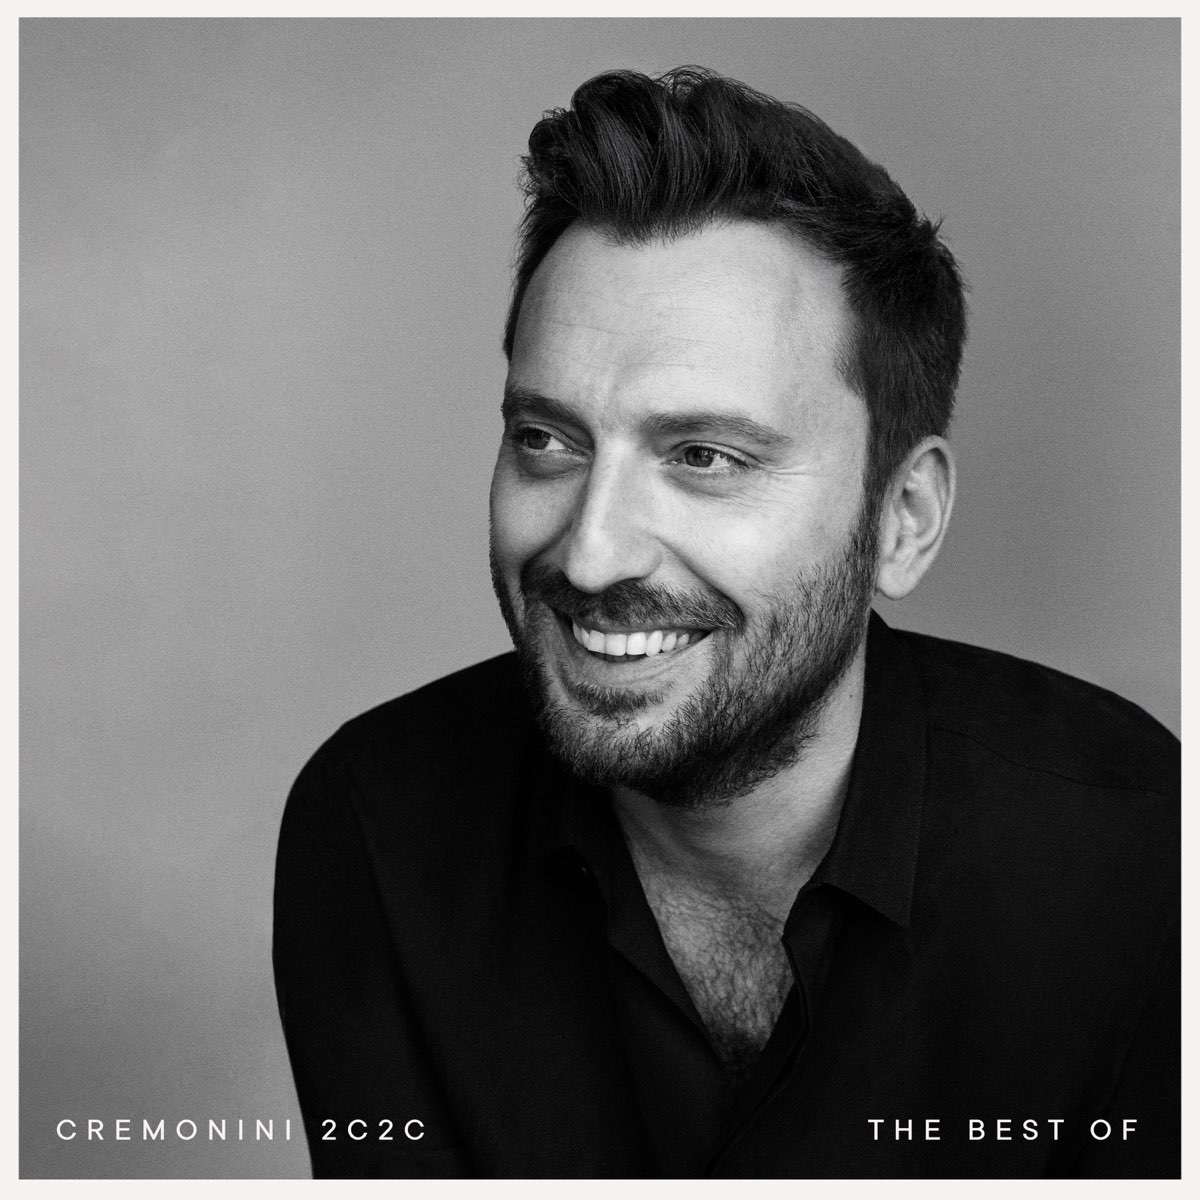 2C2C (The Best Of) by Cesare Cremonini on Apple Music